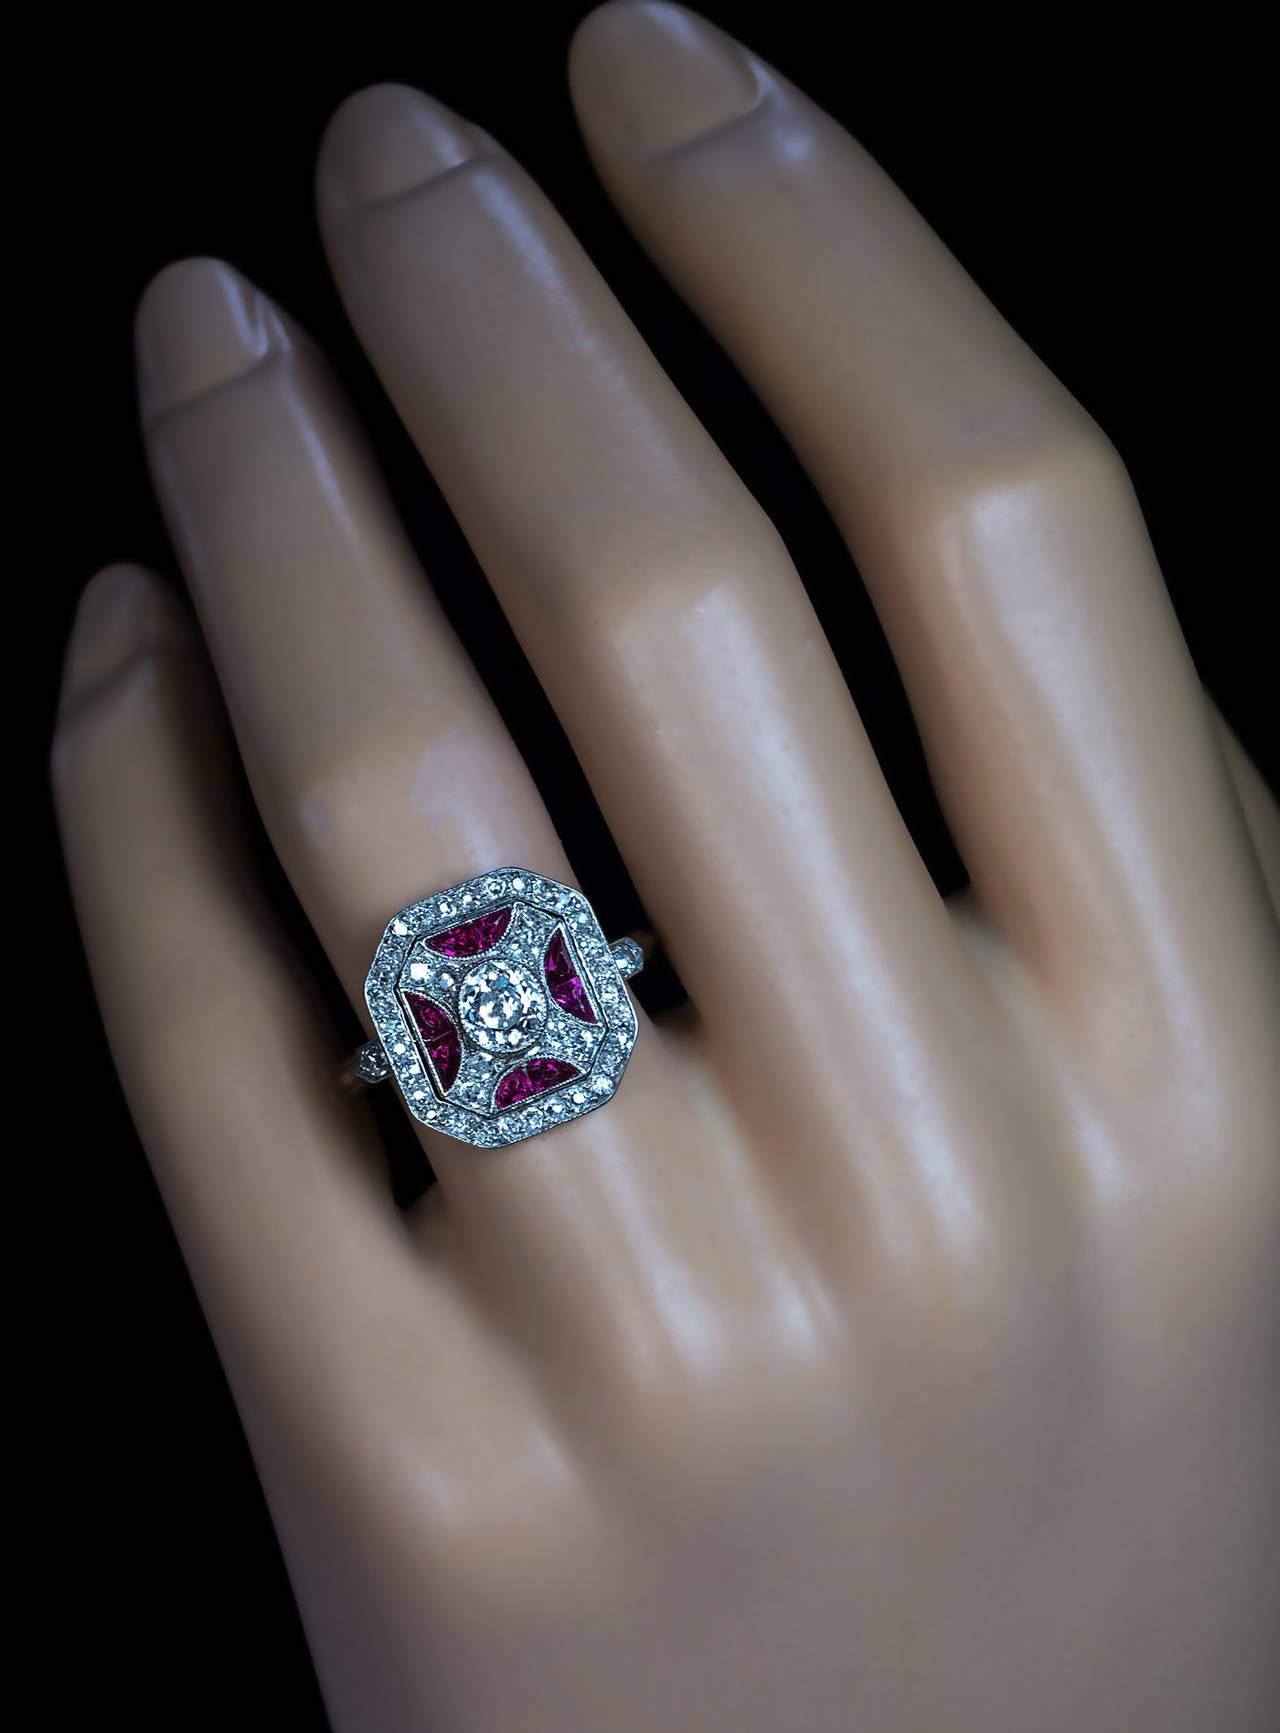 Circa 1930

Platinum over 18K gold, centered with an oval old cut diamond (5 x 4.5 x 2.9 mm, approximately 0.50 ct, H color, SI1 clarity) surrounded by calibre cut synthetic rubies and old single cut diamonds

Marked with early Soviet hallmarks